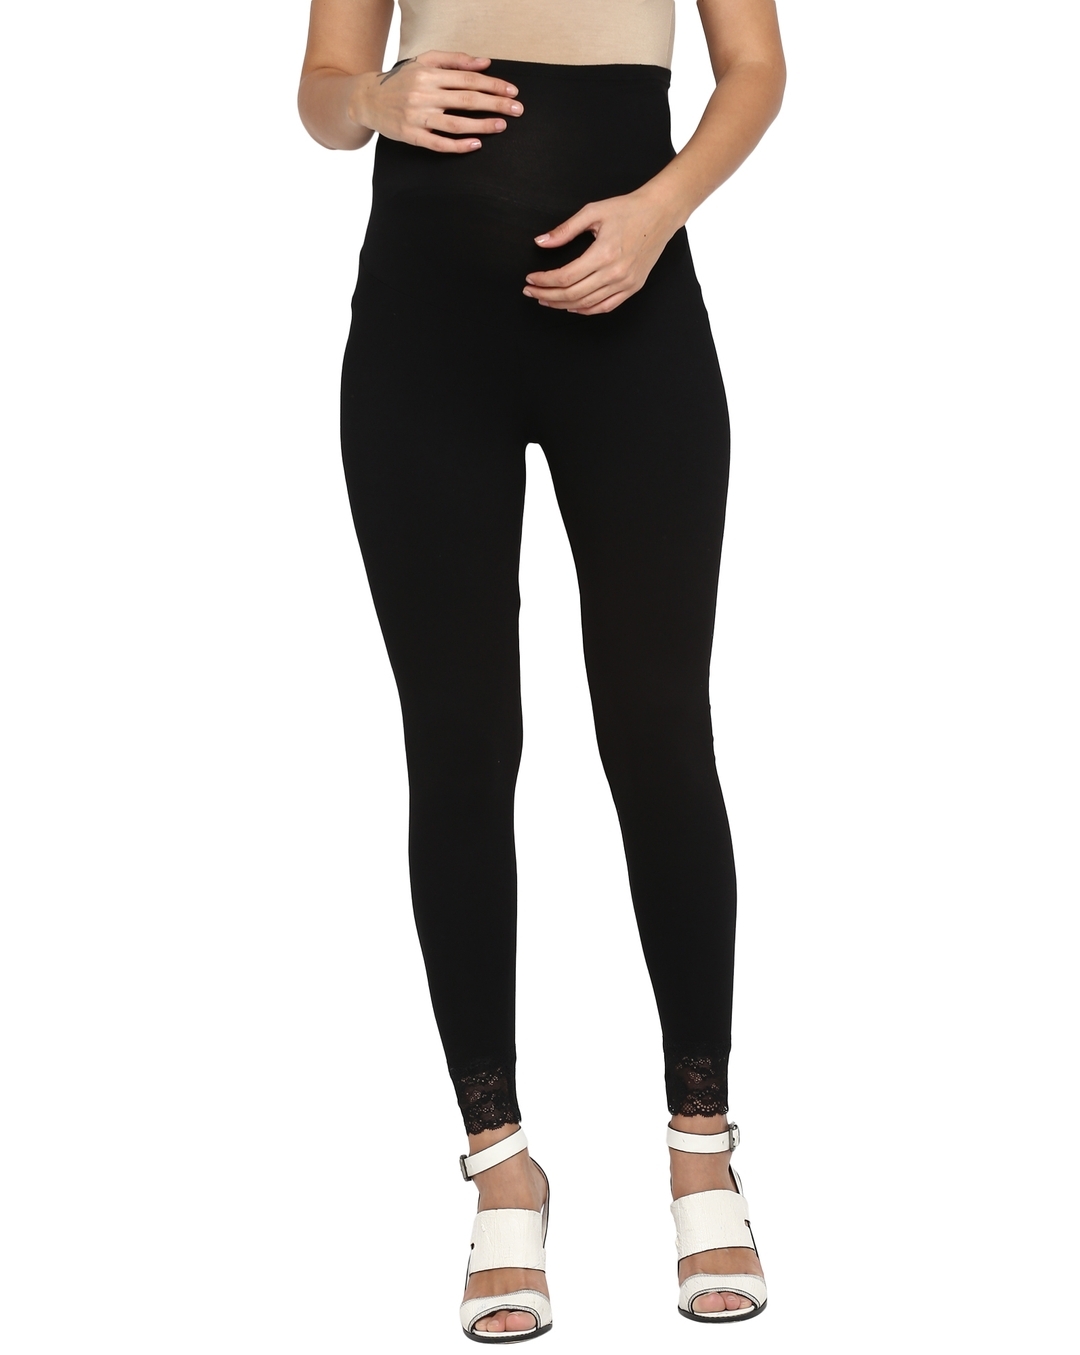 Mumberry® Maternity Leggings | Belly Band | Full Bump Support With Pocket